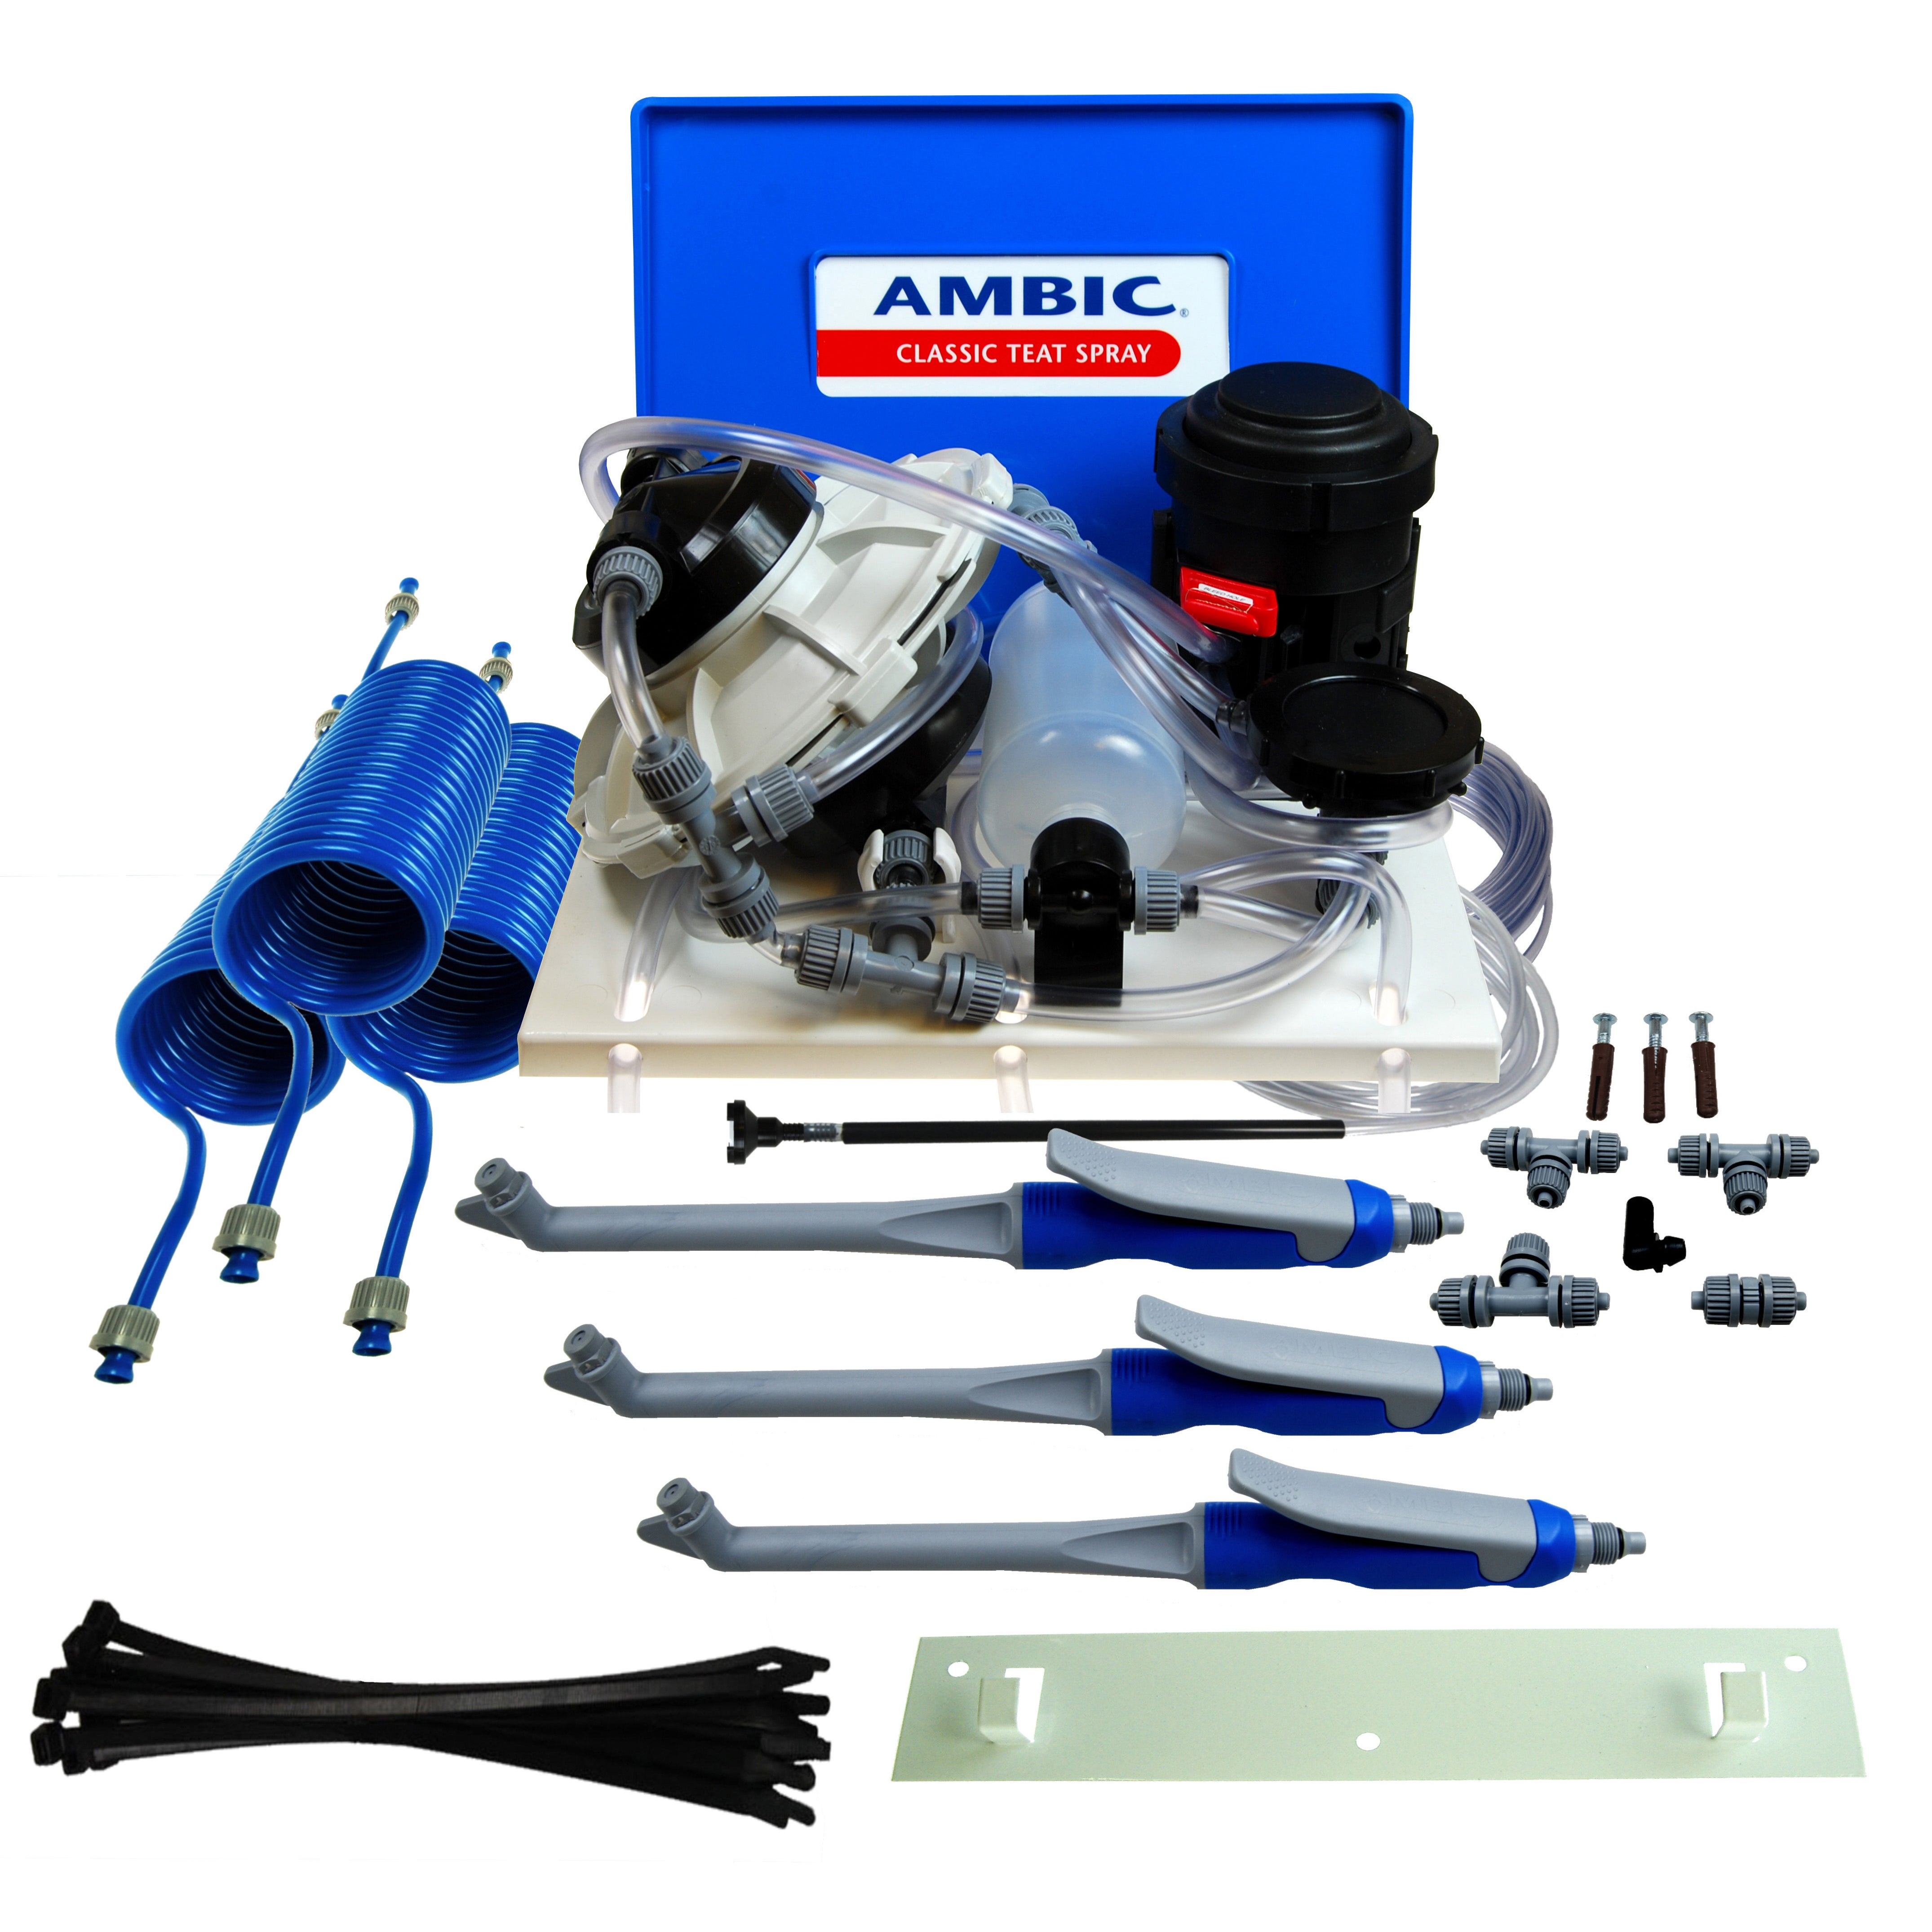 Ambic Classic Teat Spray System Complete - Easy Spray Guns